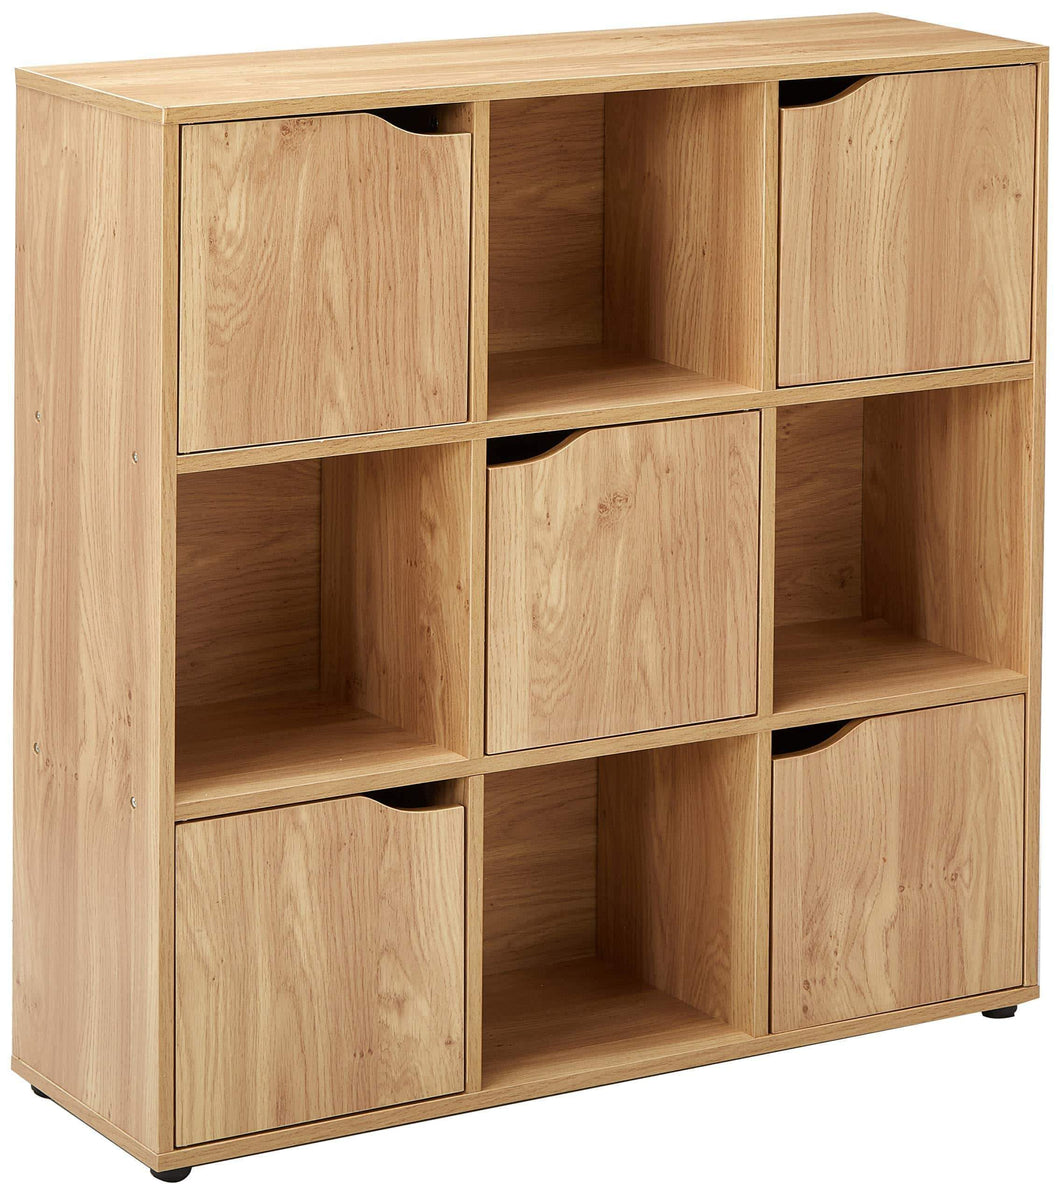 Home Basics Cube Shelves Natural Wood Shelf with Doors, Room, Clothes Storage, Home Décor, Bookshelf, Toy Organizer Home & Office - 4 Open/5 Cabinet-Style (9 C